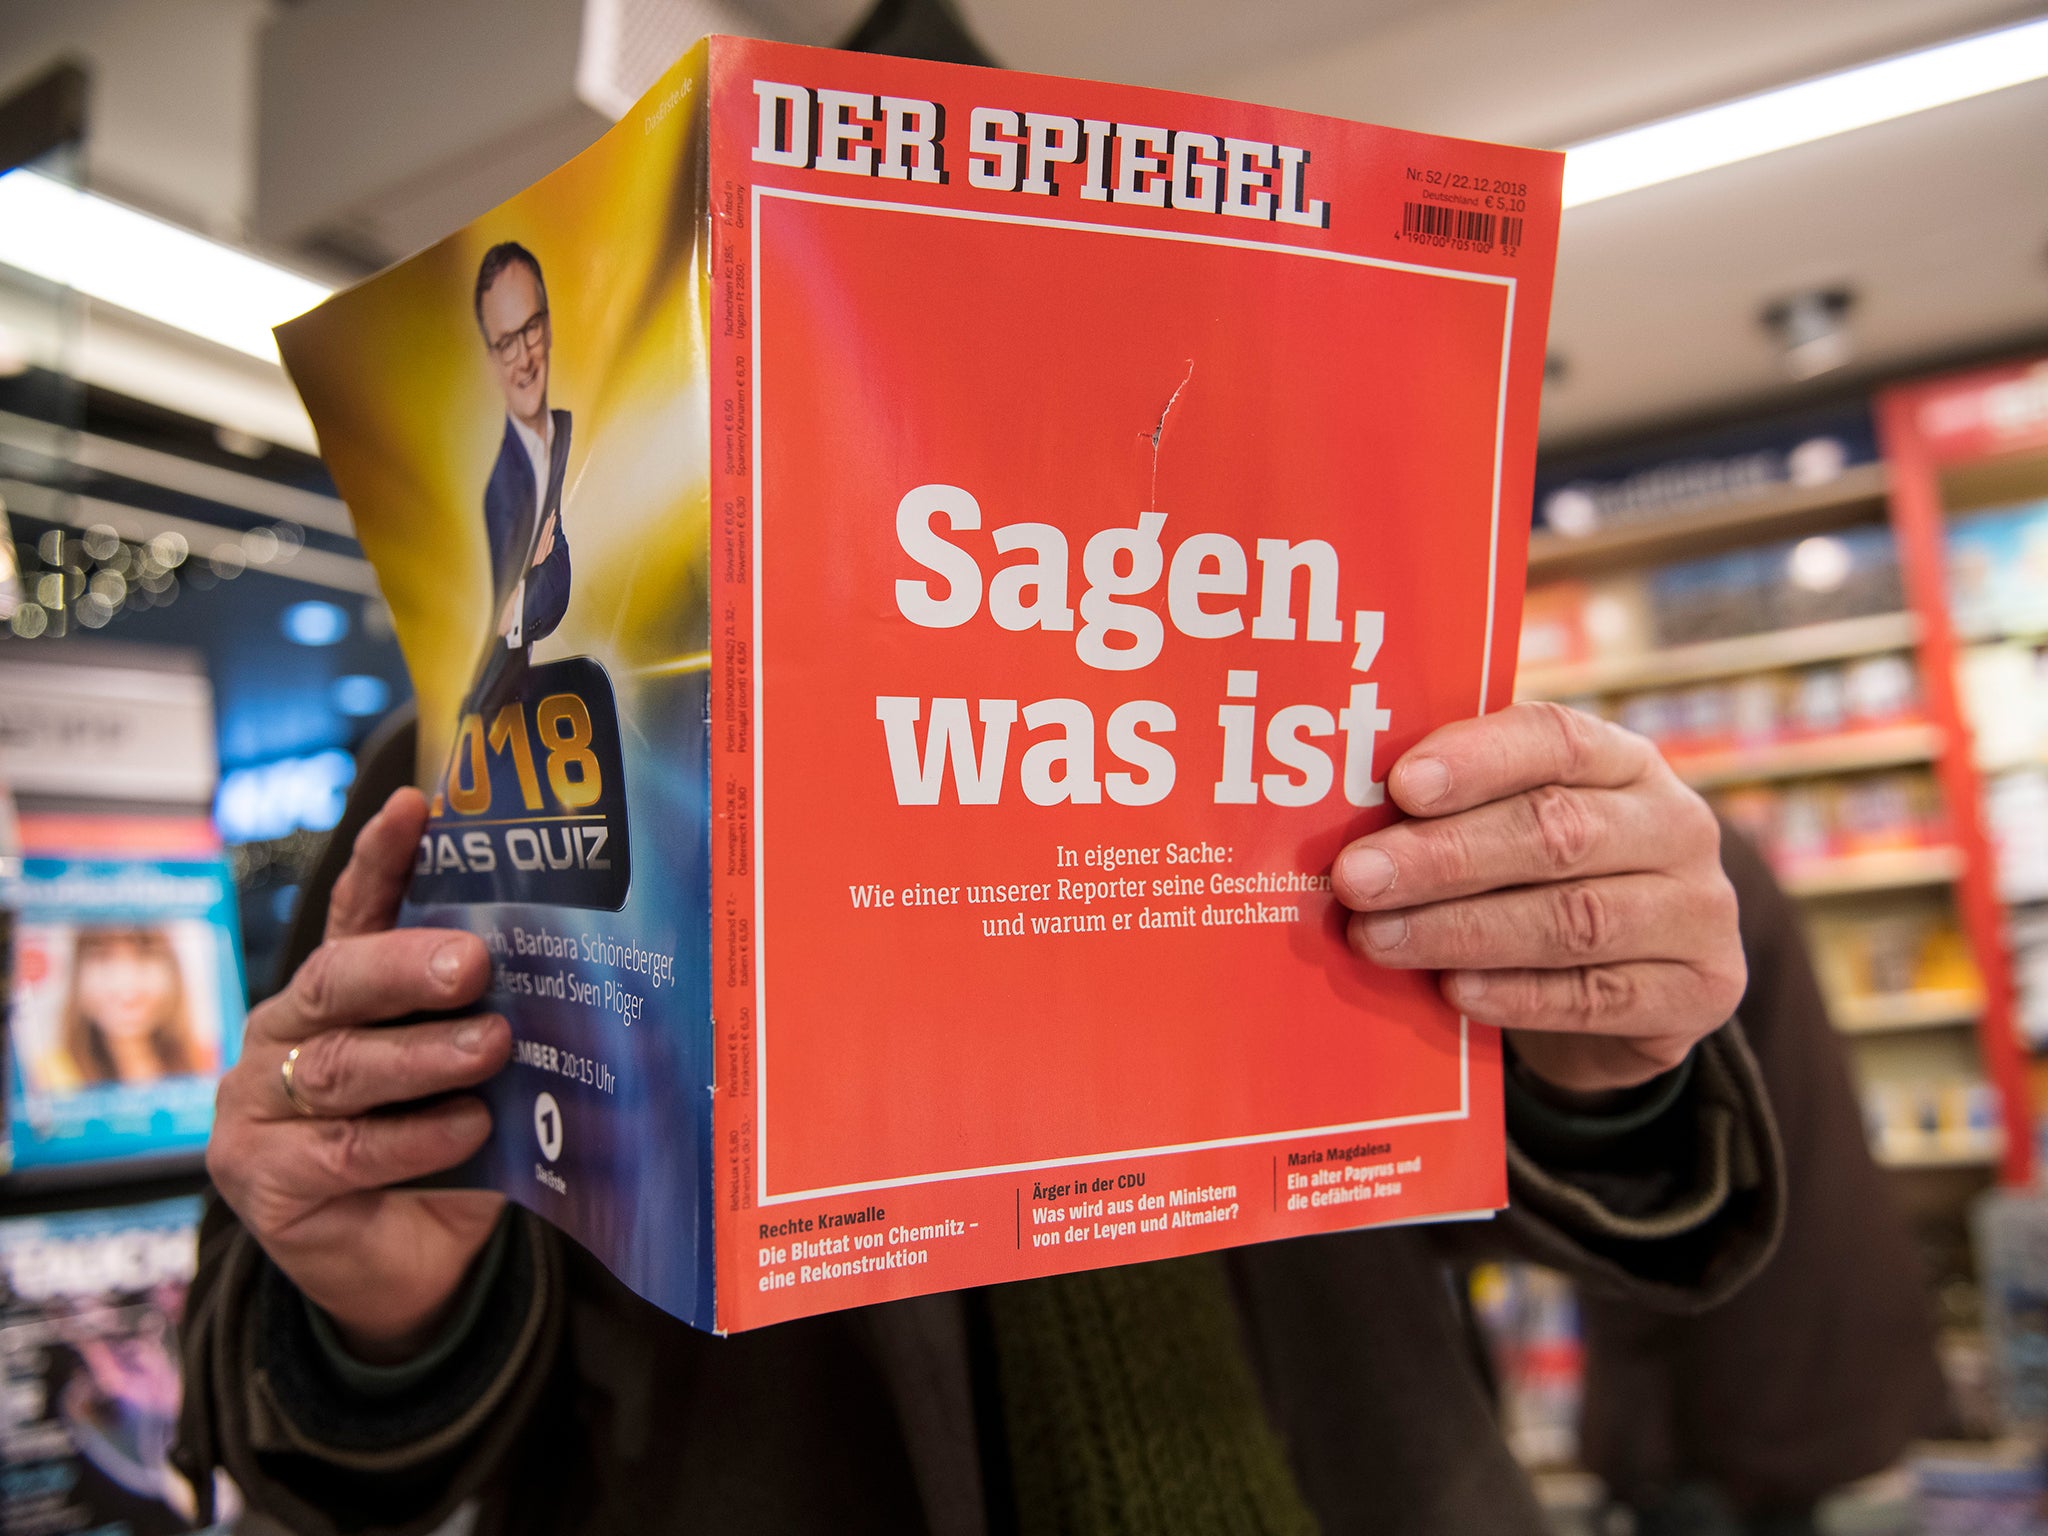 A man looks into the latest issue of German newsweekly Der Spiegel with a cover page that reads: 'To say, what is', a quote referring to the credo of Rudolf Augstein, founder of the magazine, in an issue devoted to a scandal surrounding Claas Relotius